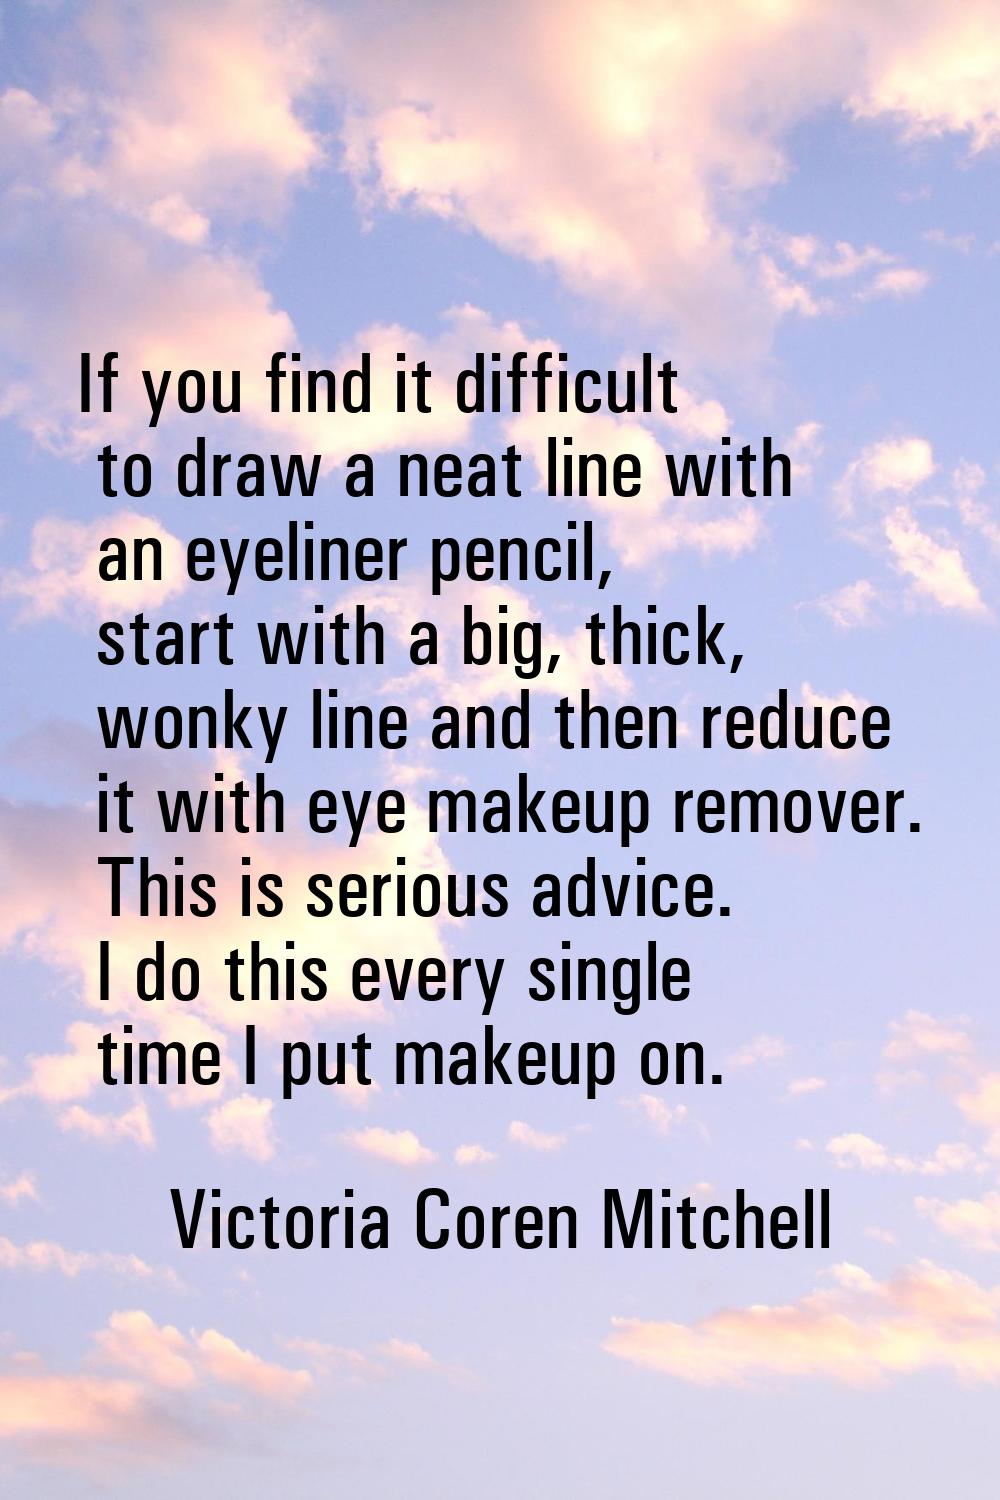 If you find it difficult to draw a neat line with an eyeliner pencil, start with a big, thick, wonk